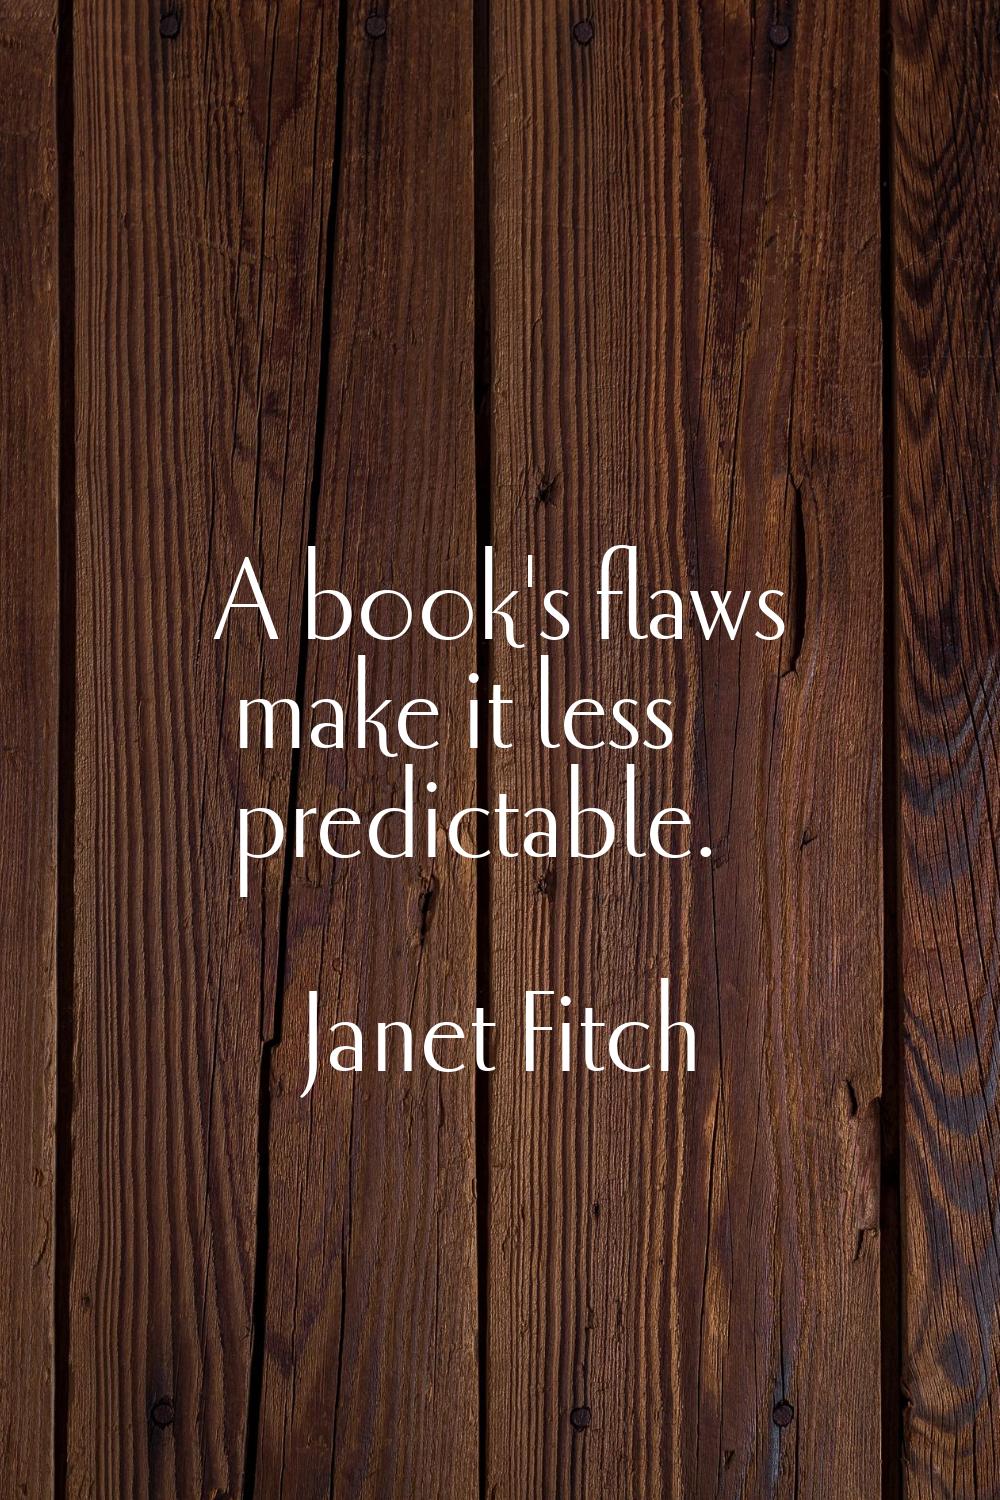 A book's flaws make it less predictable.